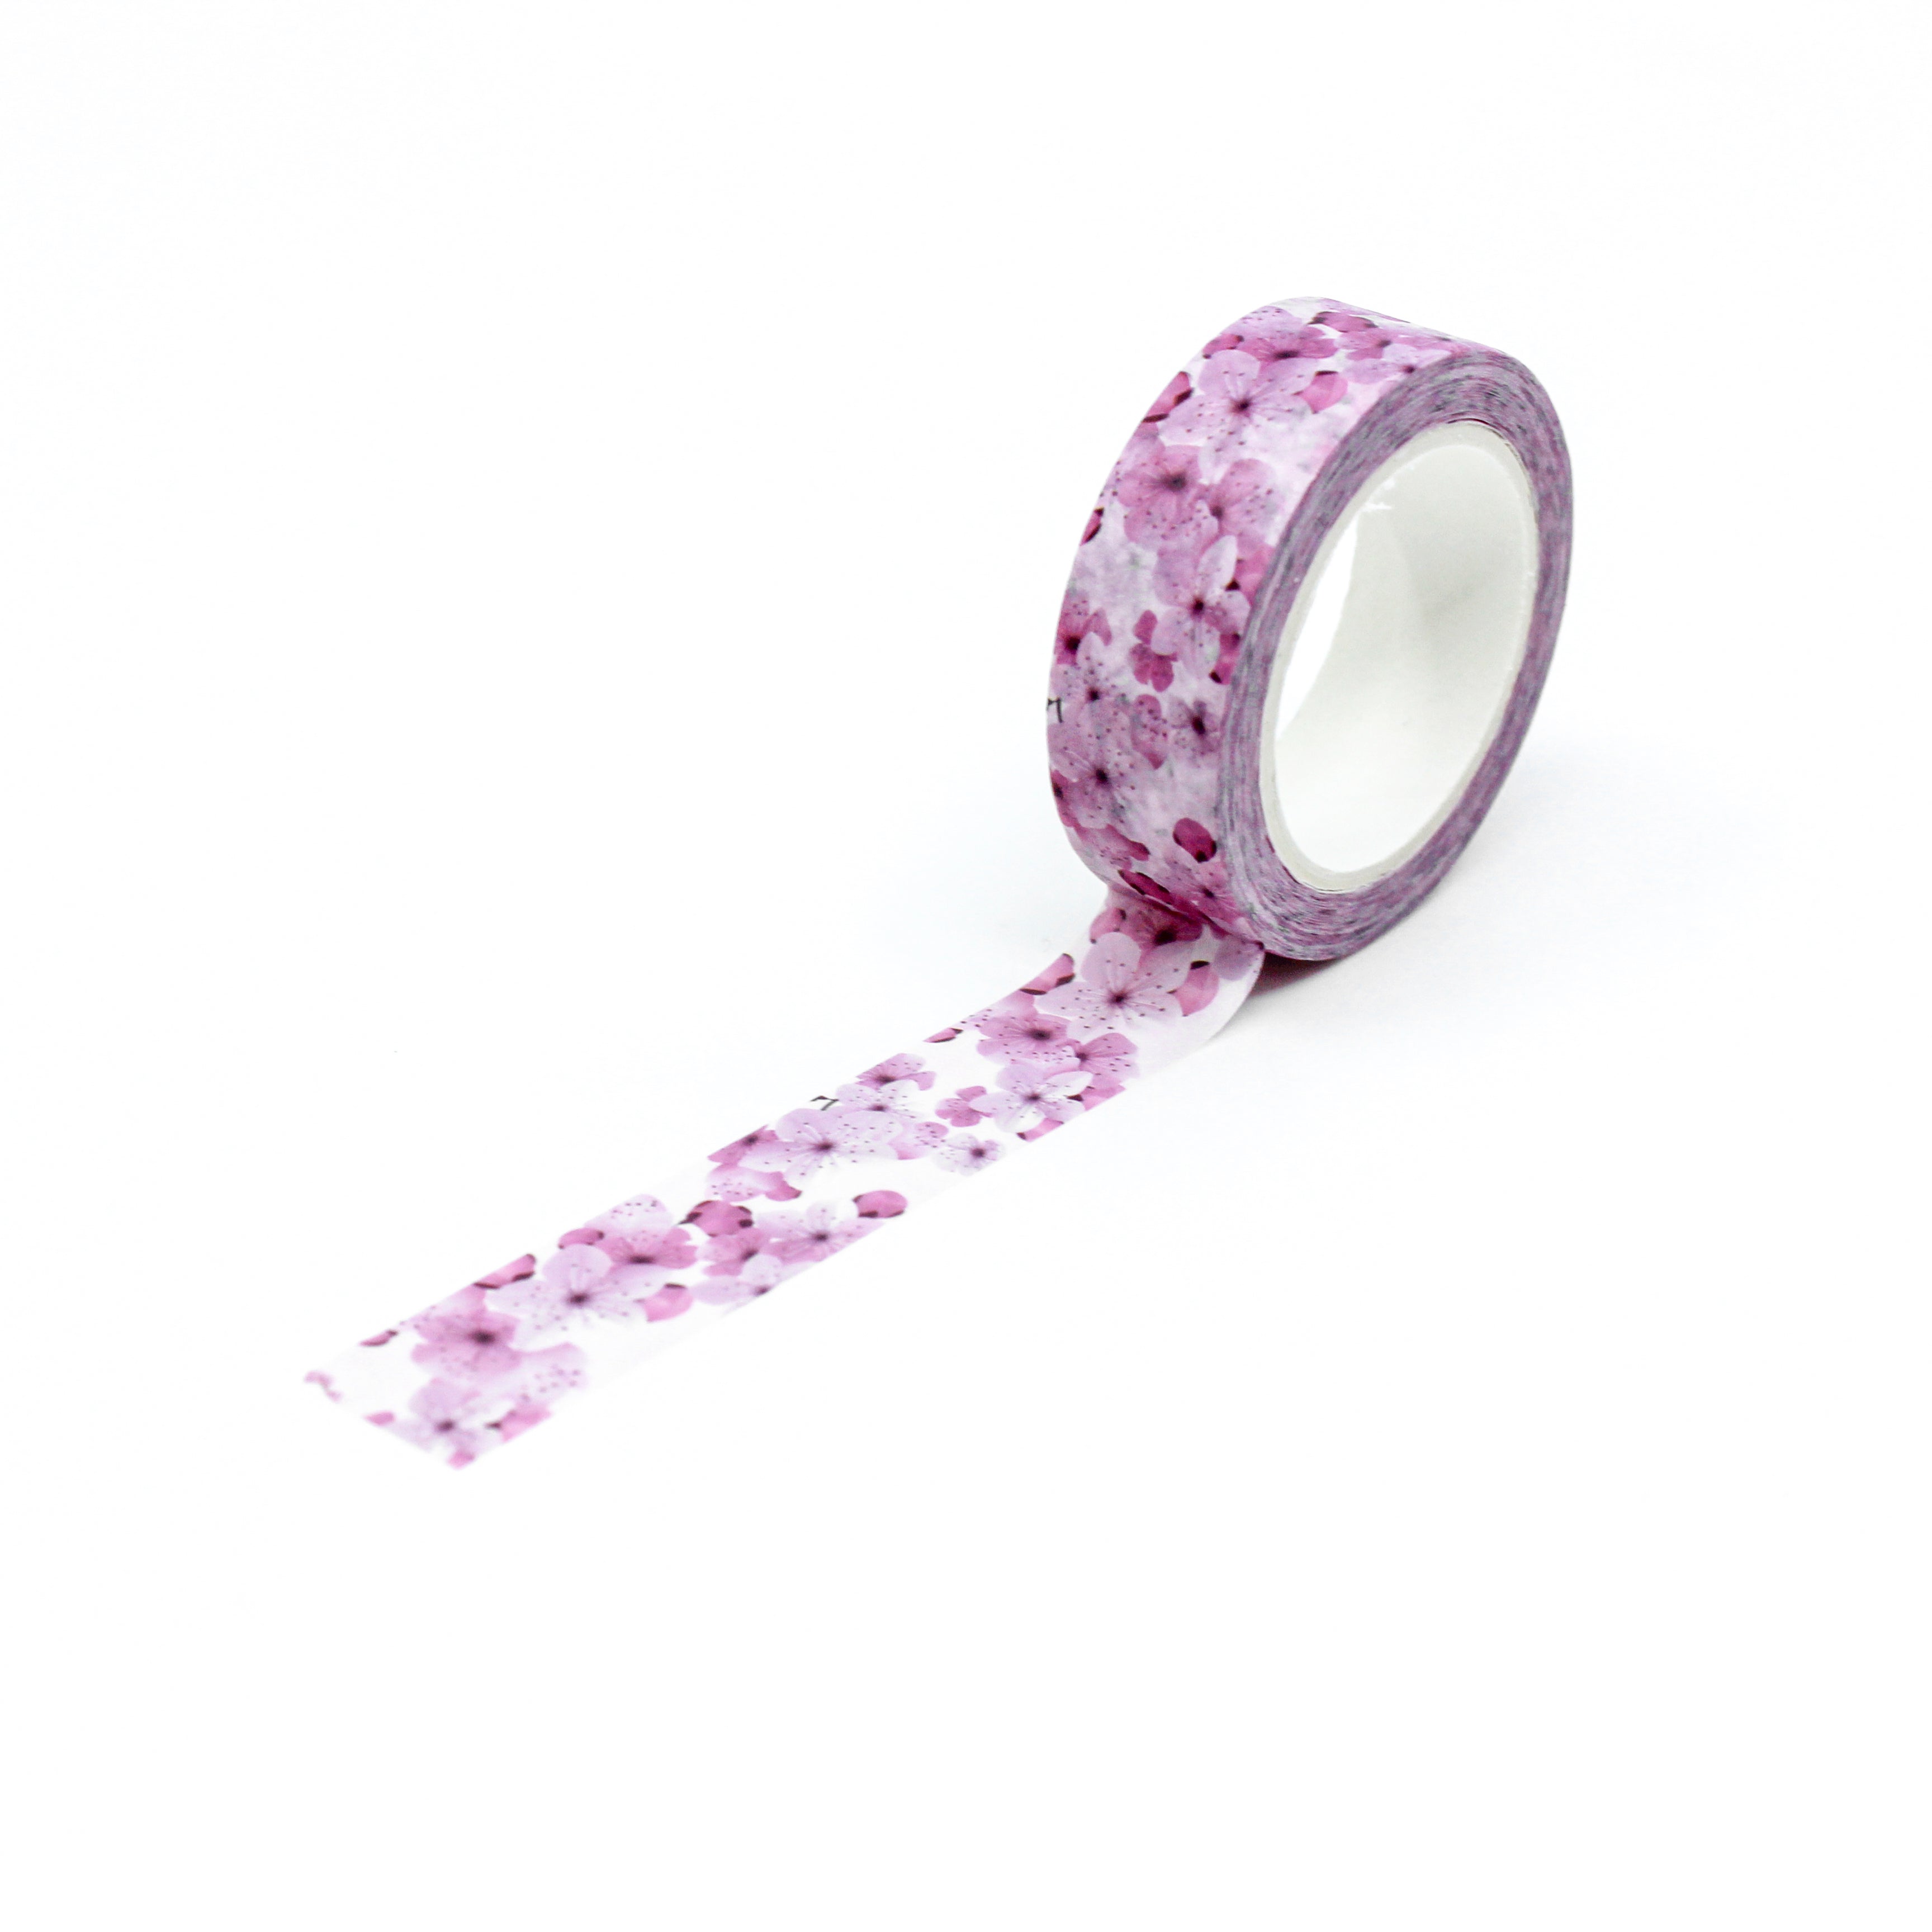 This a full pattern repeat view of cherry blossom floral collections pattern washi tape from BBB Supplies Craft Shop